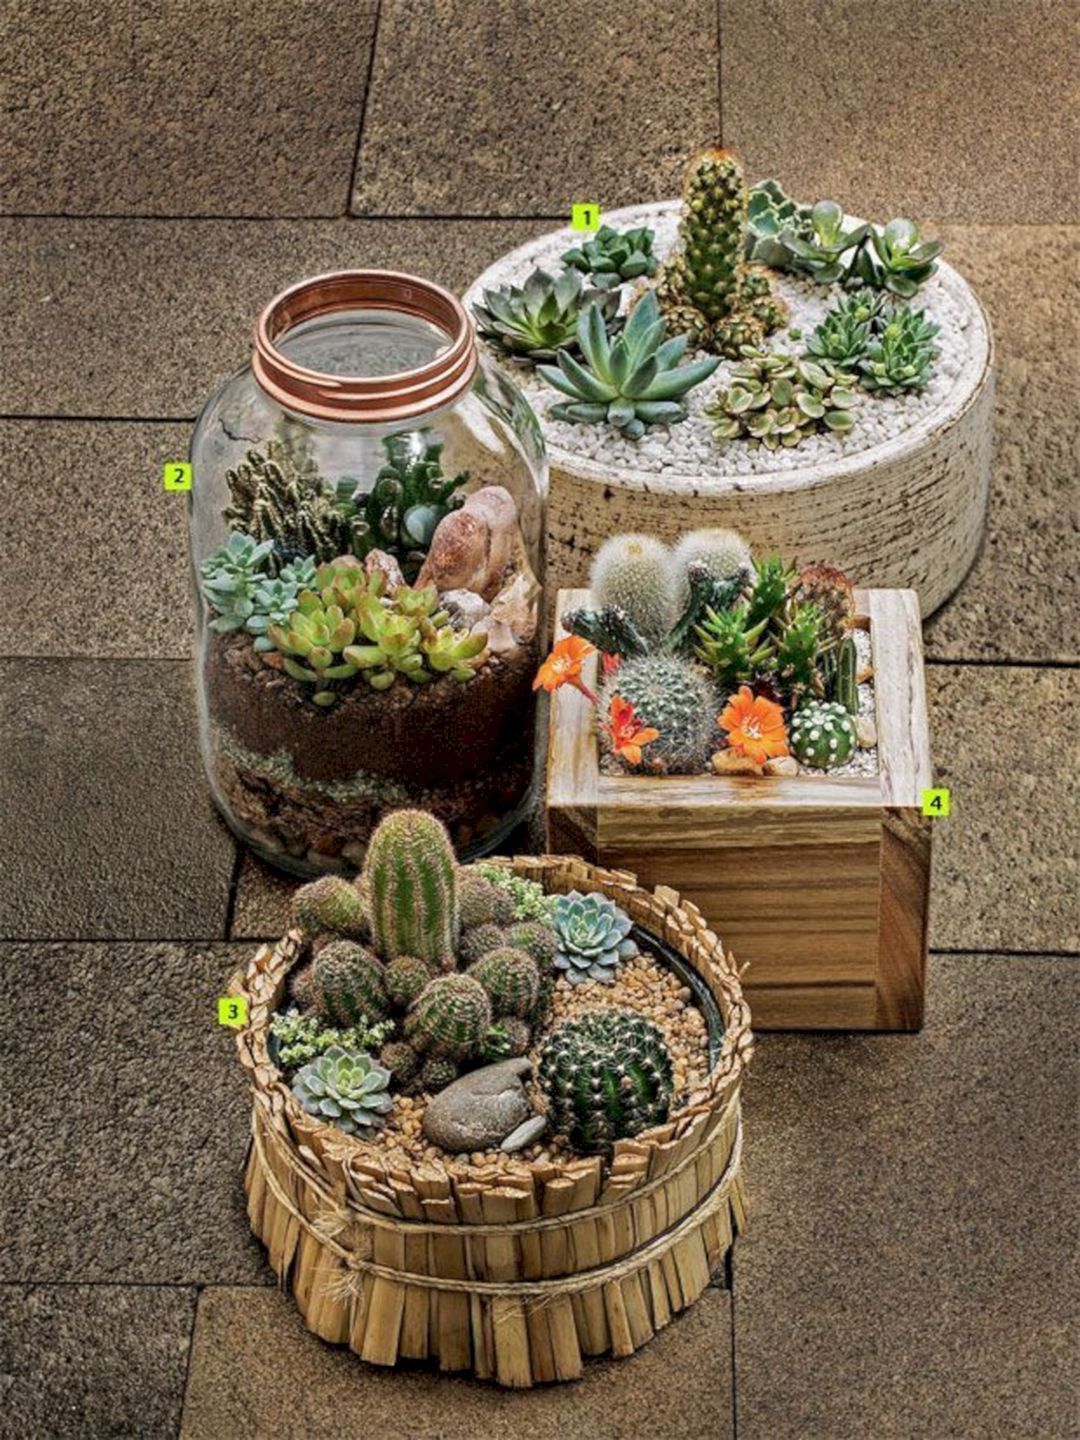 14 plants Cactus awesome ideas